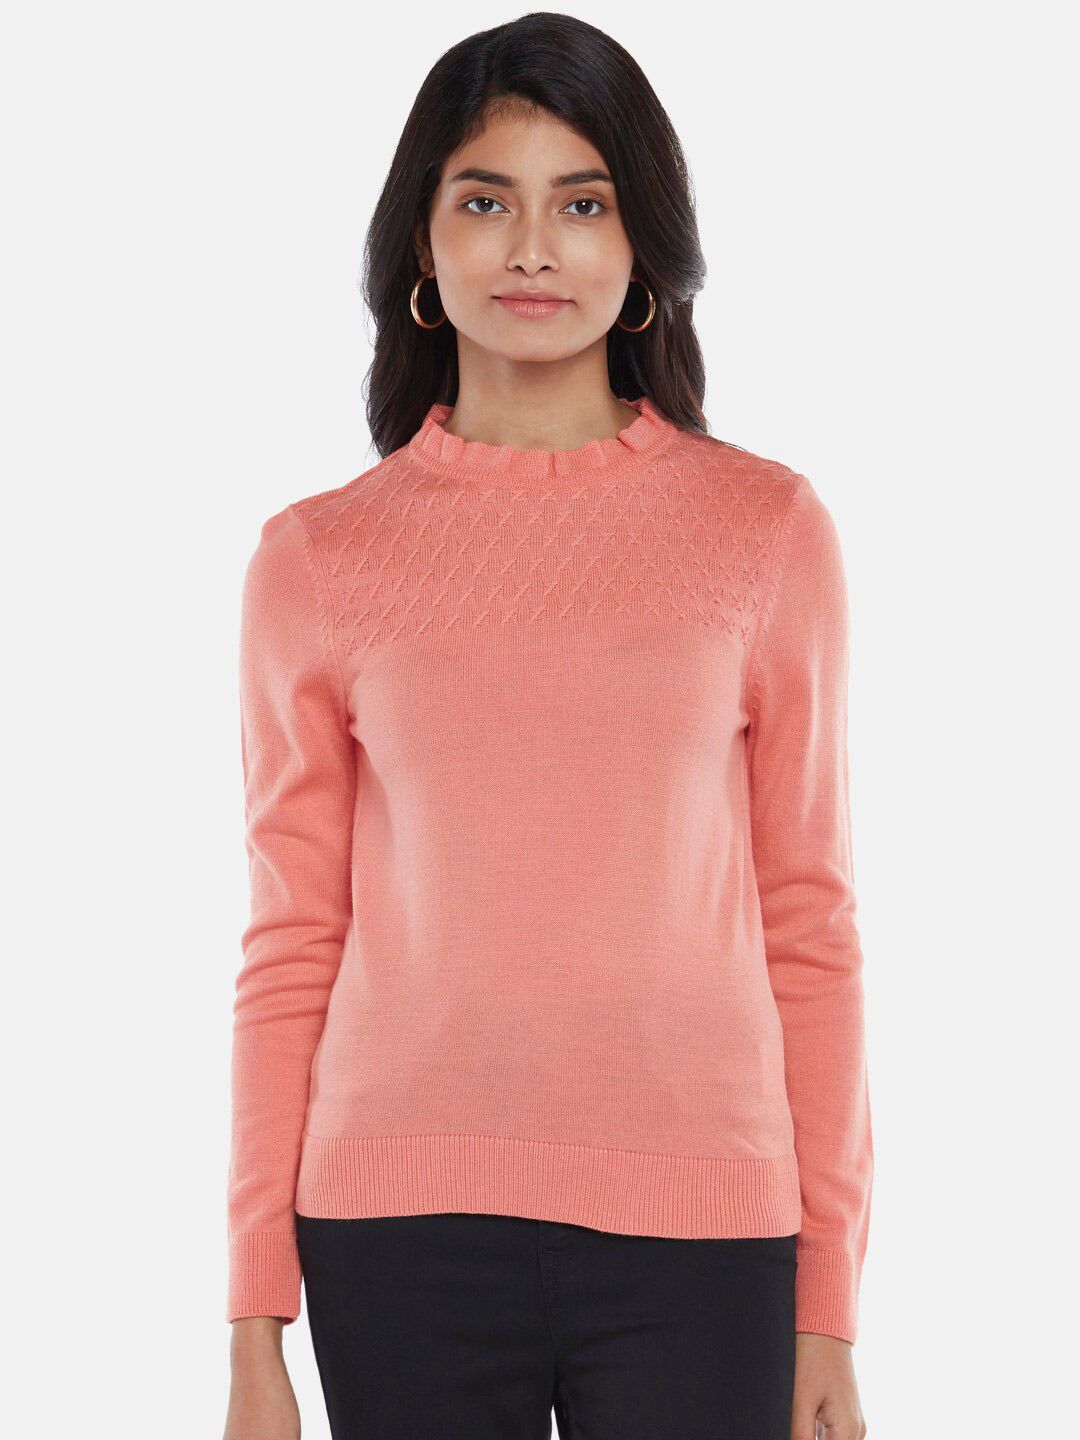 Honey by Pantaloons Women Pink Cable Knit Pullover Sweater Price in India